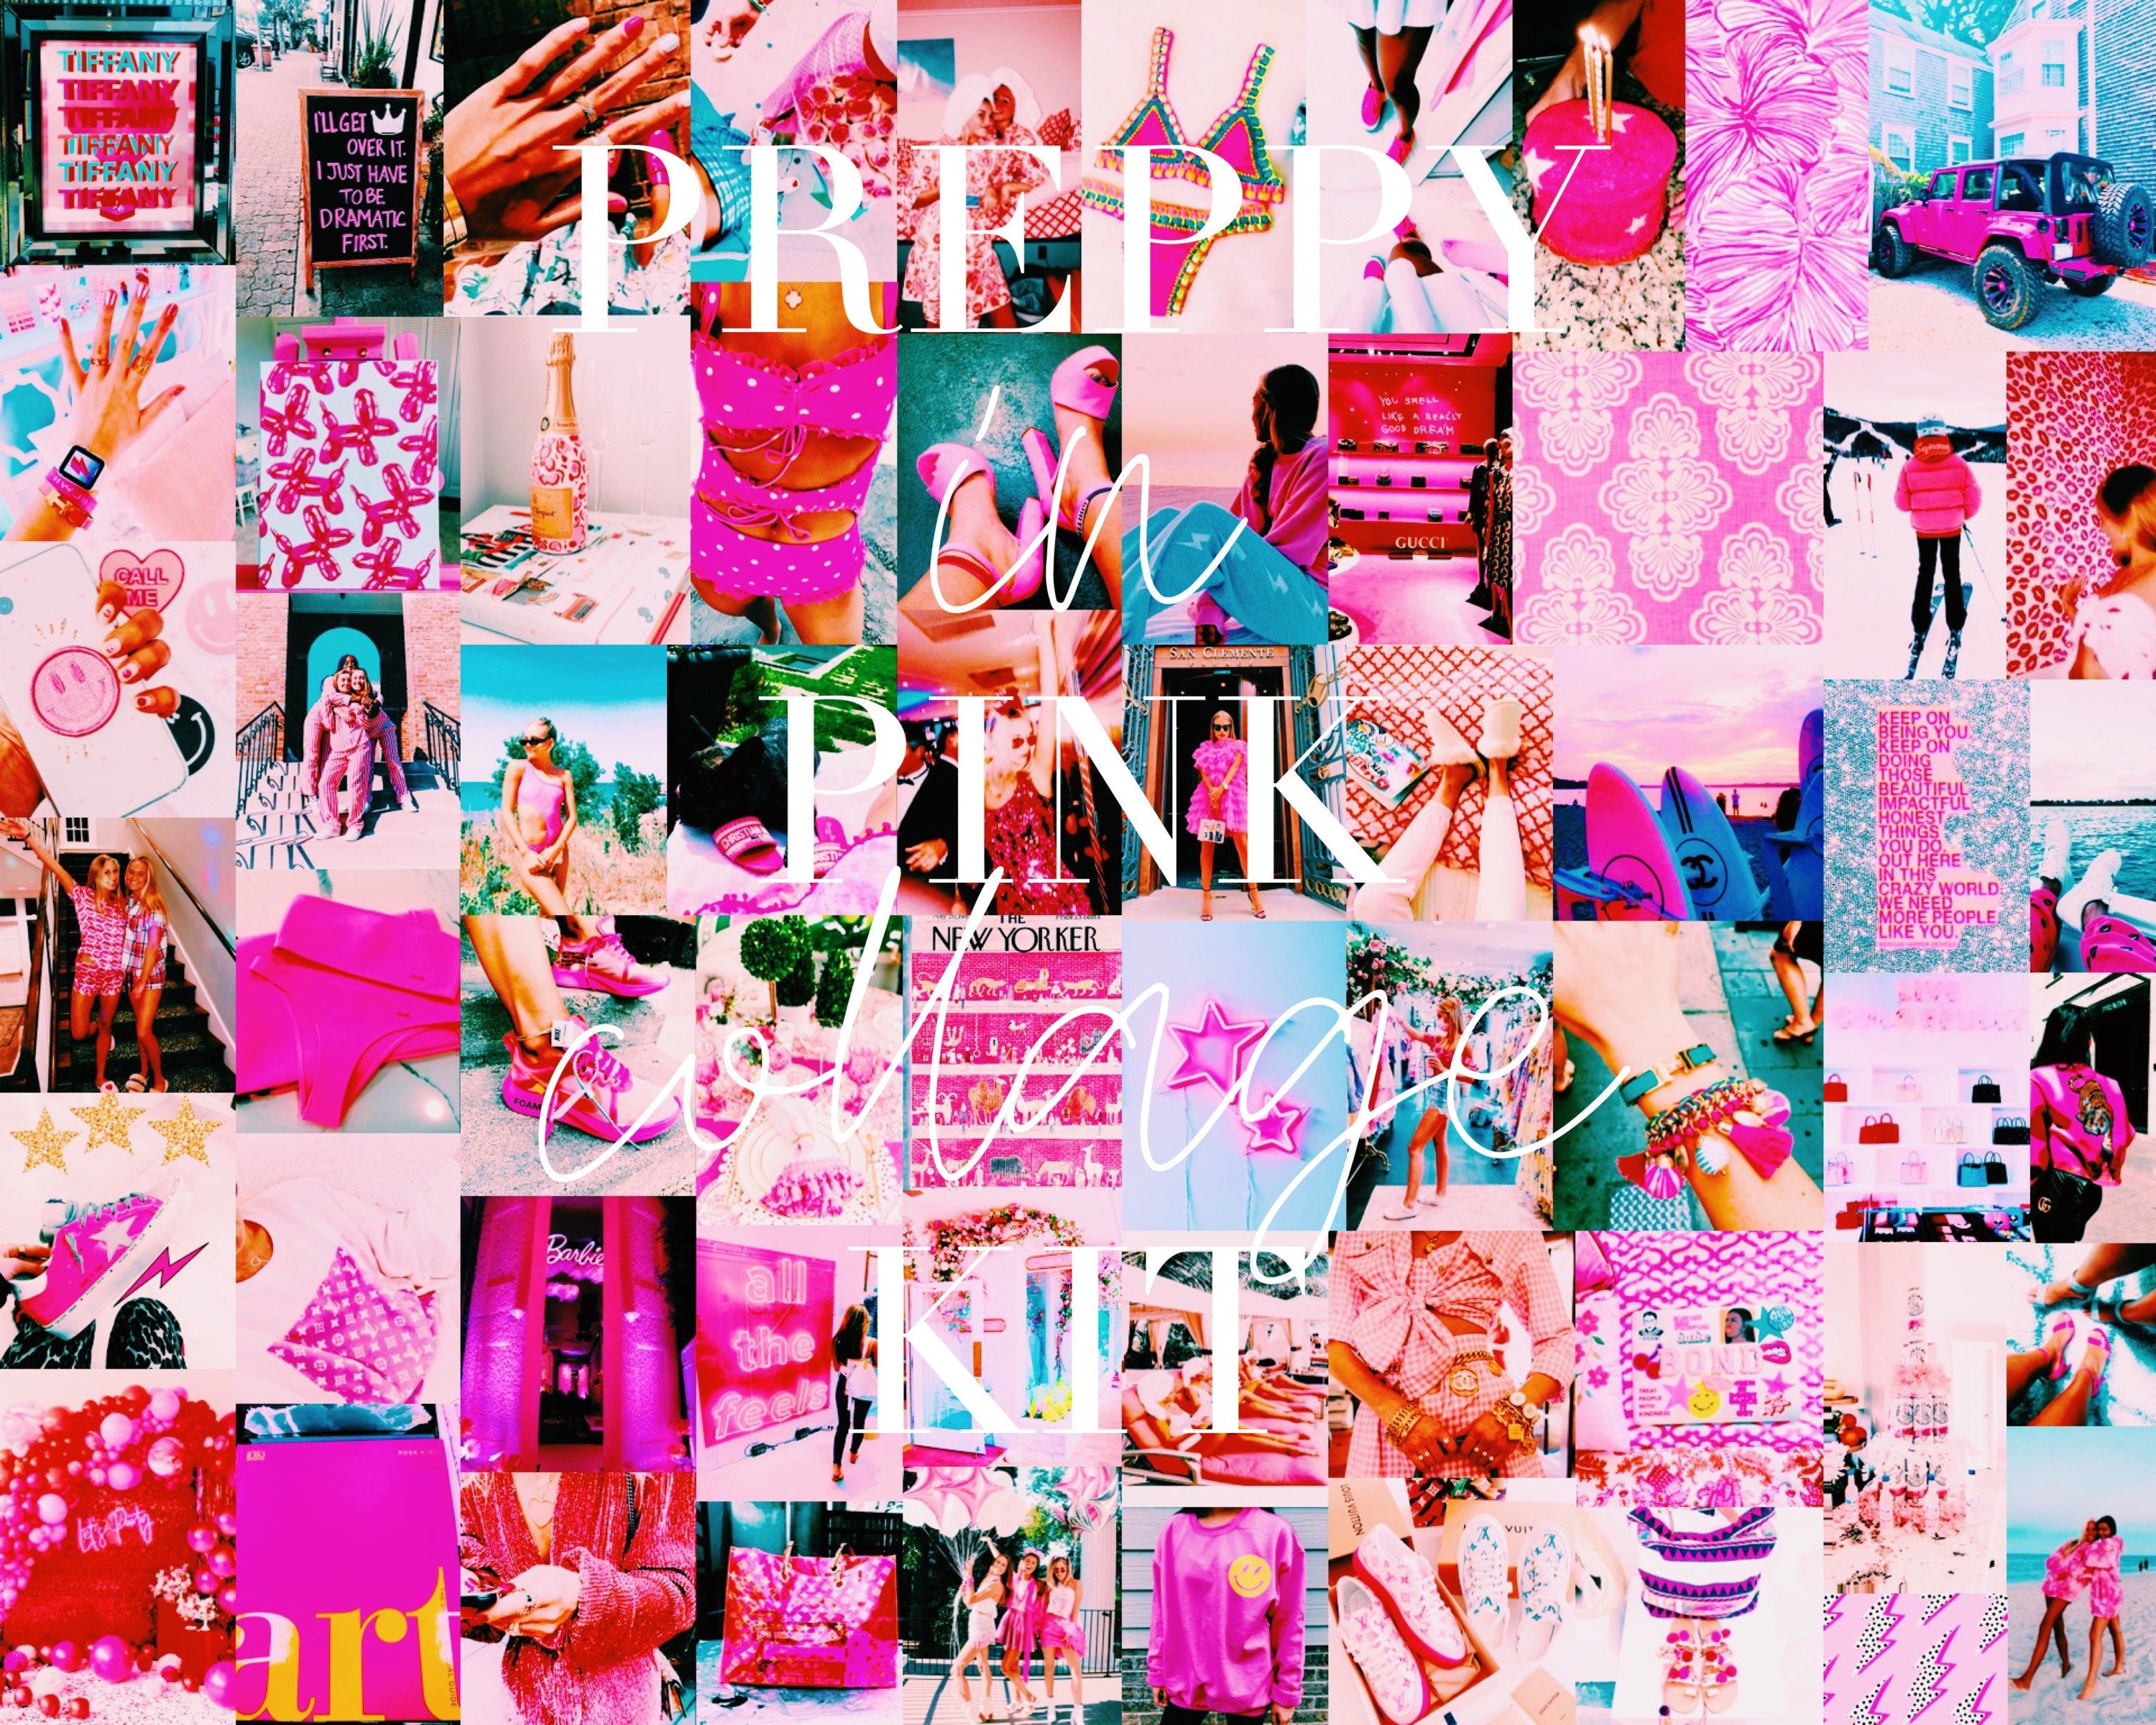 Go check out my preppy pink collage kit